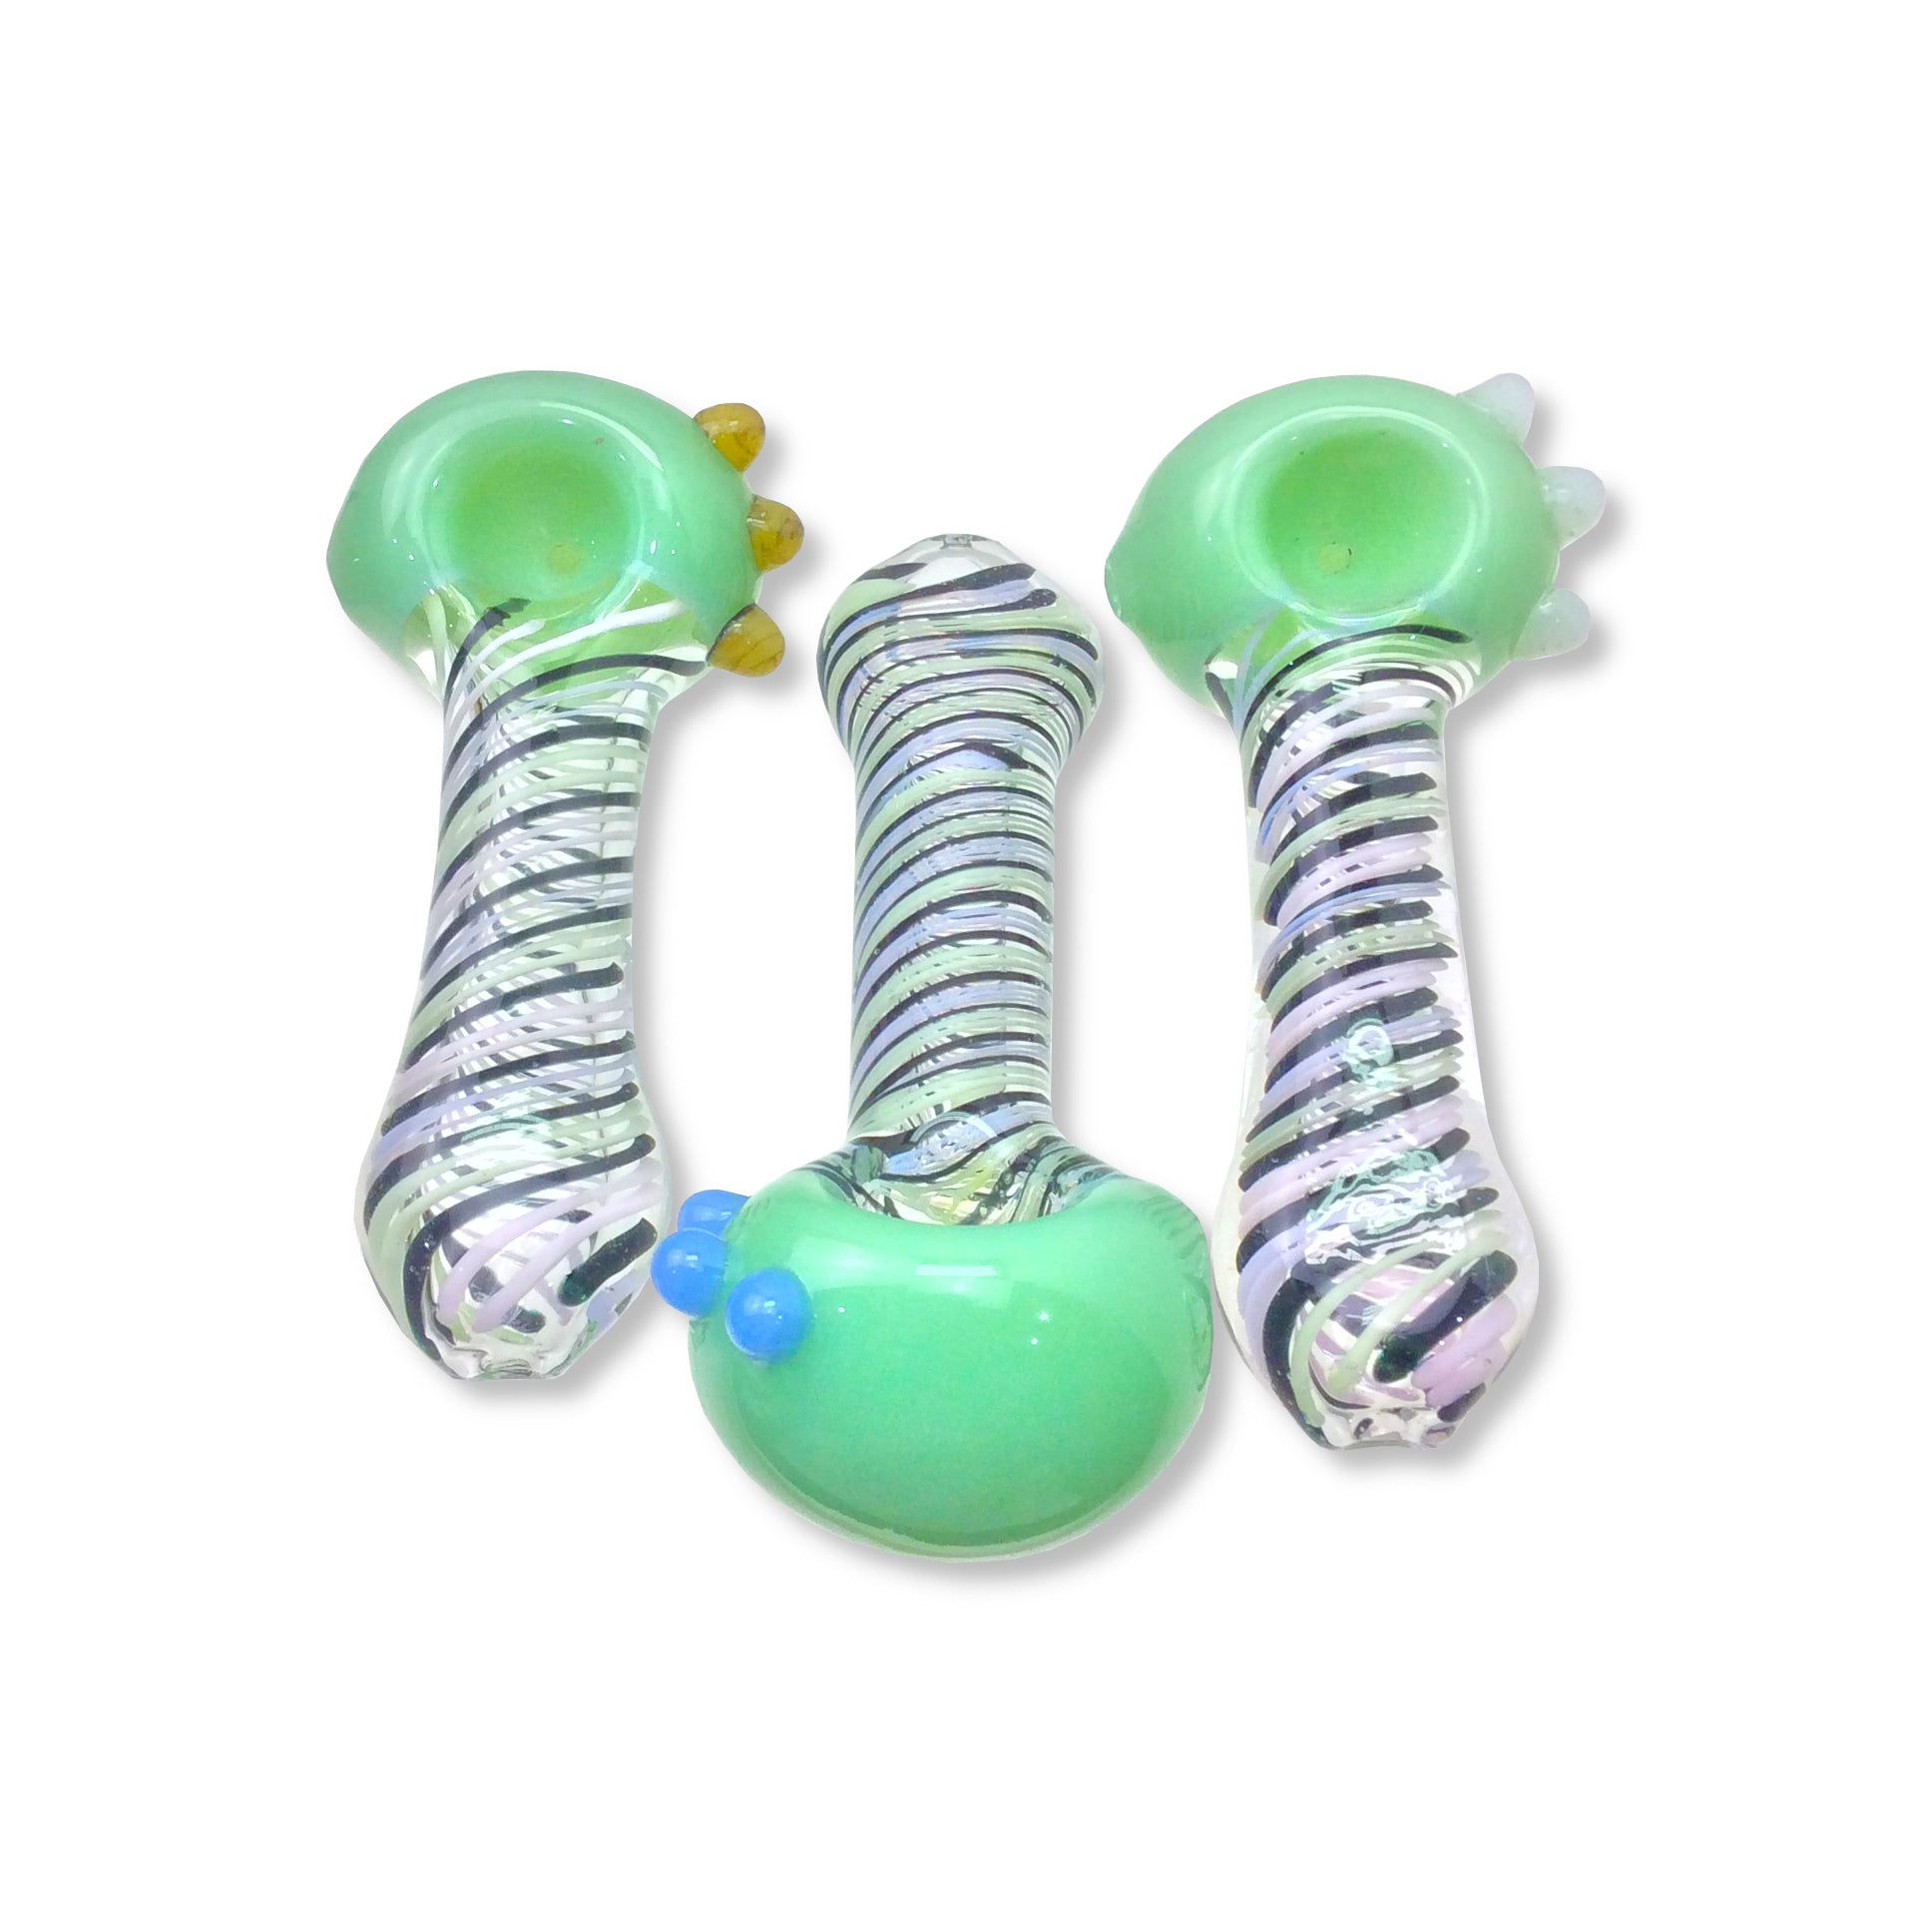 4 Inch Slime Head With Swirl Body Hand Pipe